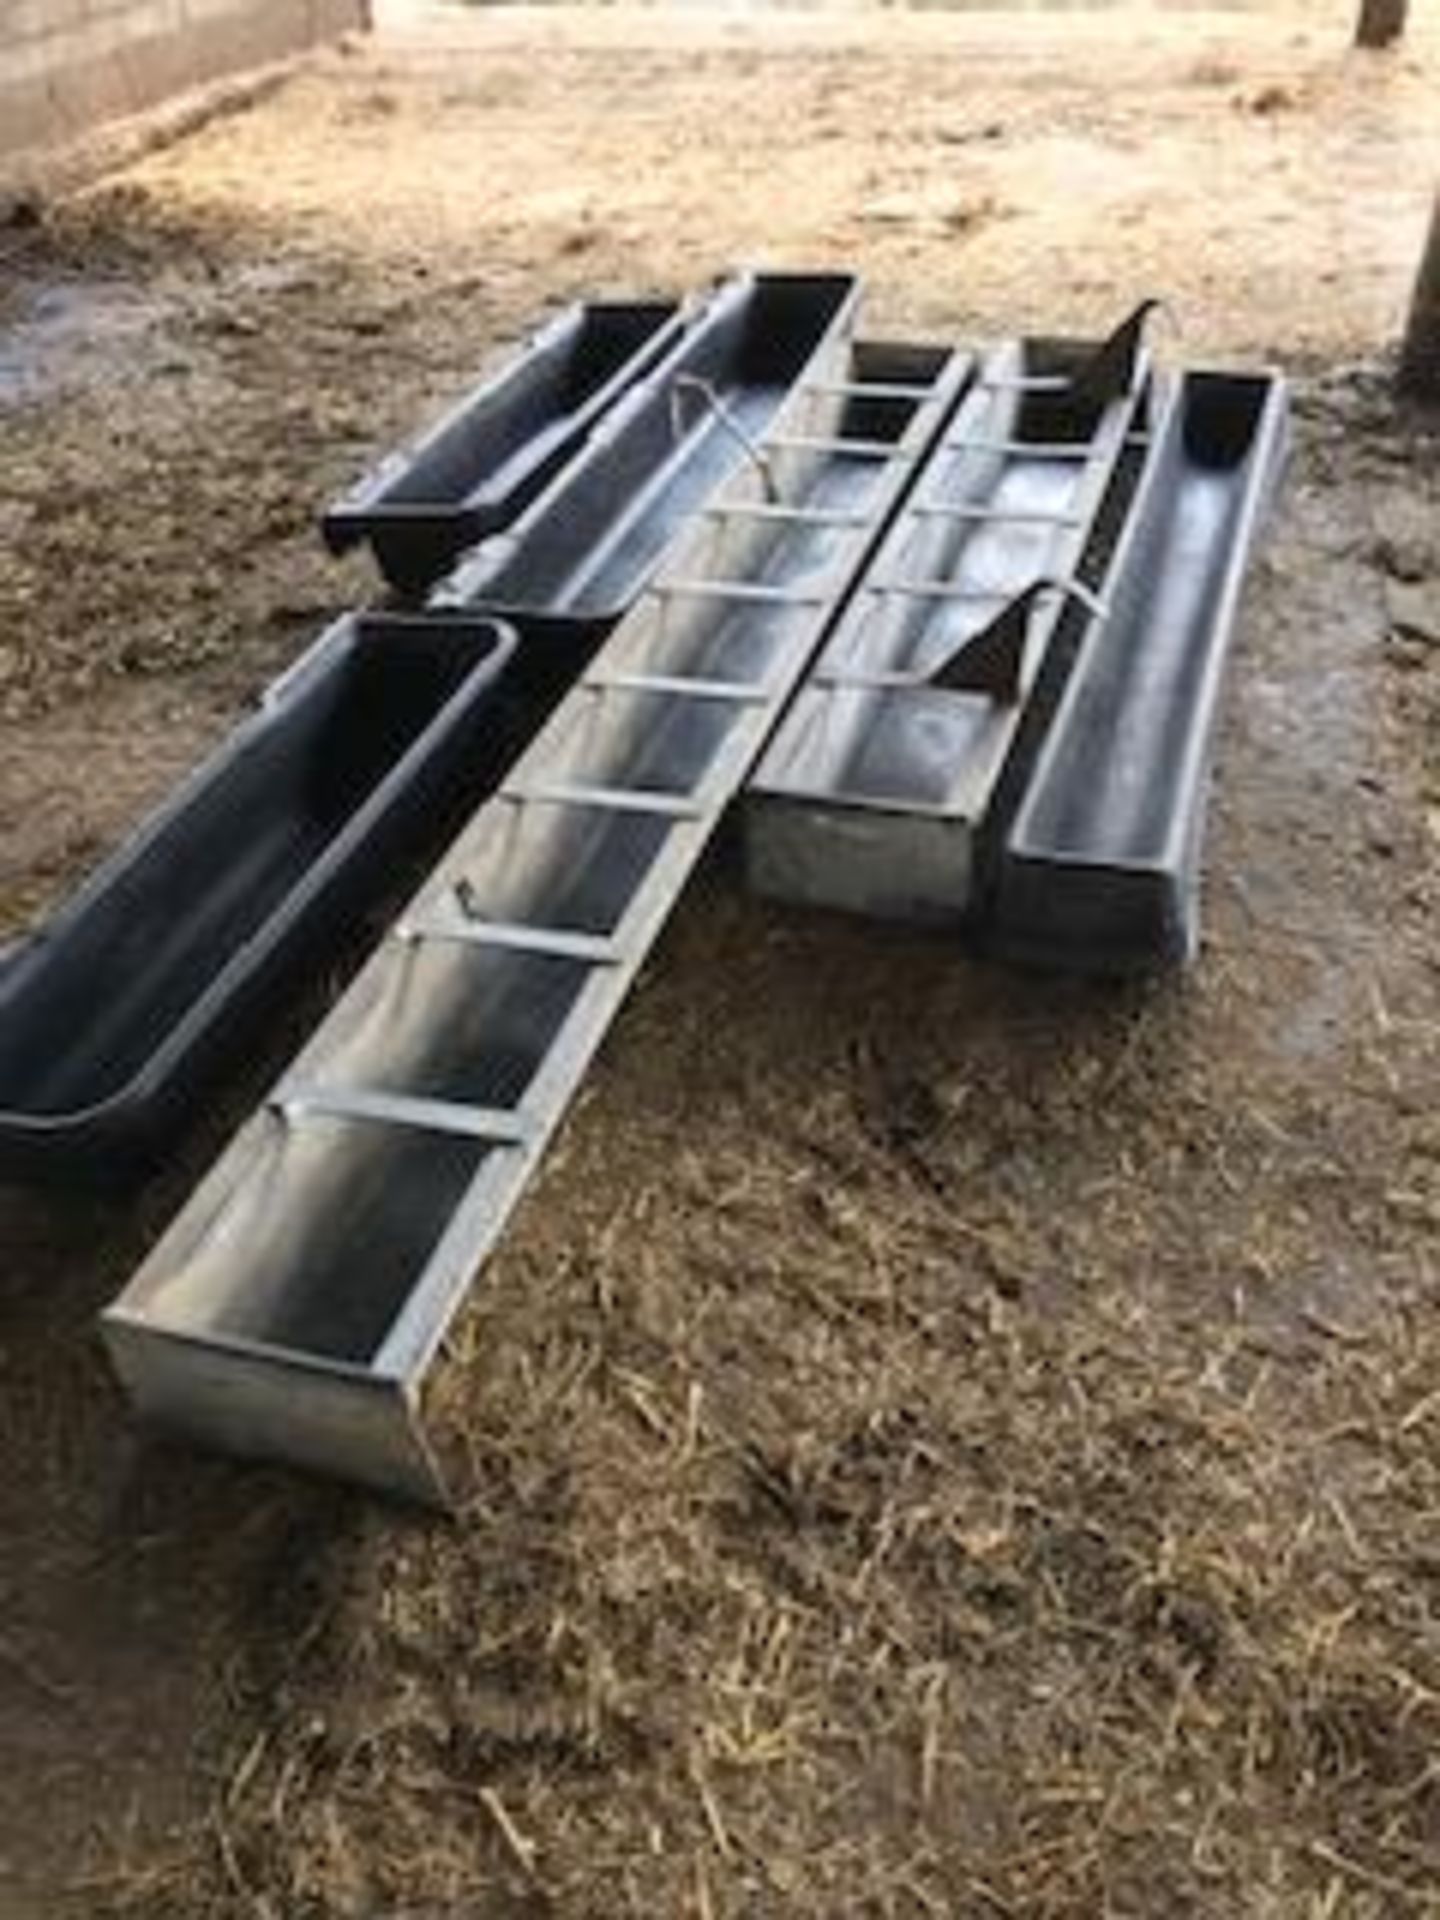 Plastic and metal feed troughs